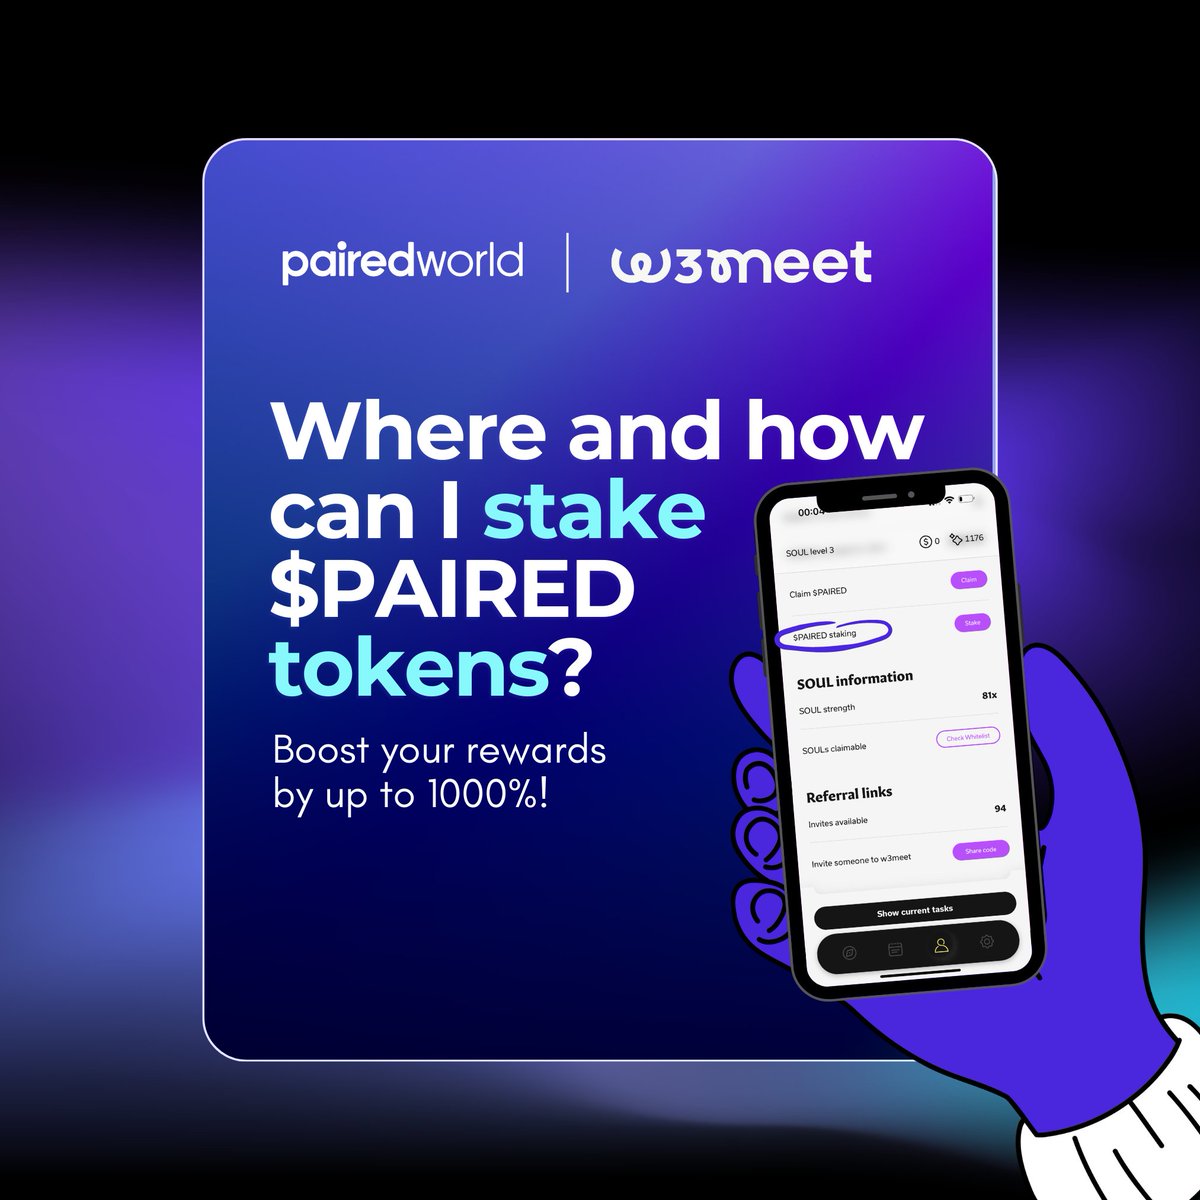 Stake your $PAIRED tokens in the @w3meetapp  available for download on iOS and Android to boost your rewards by up to 1000%!